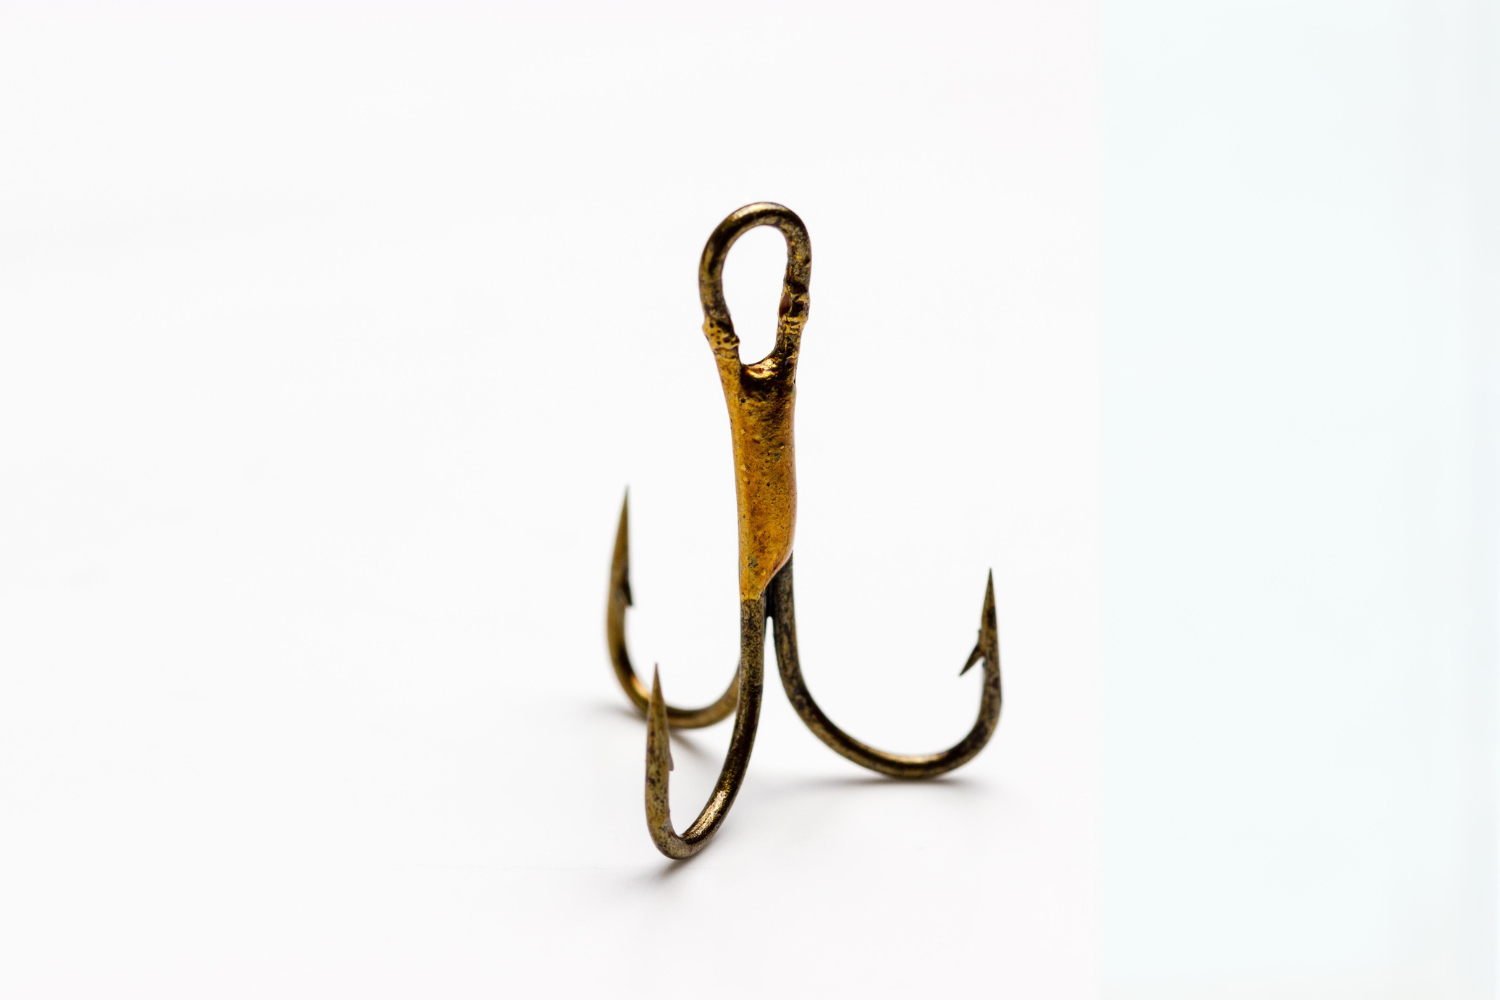 image of a fishing hook